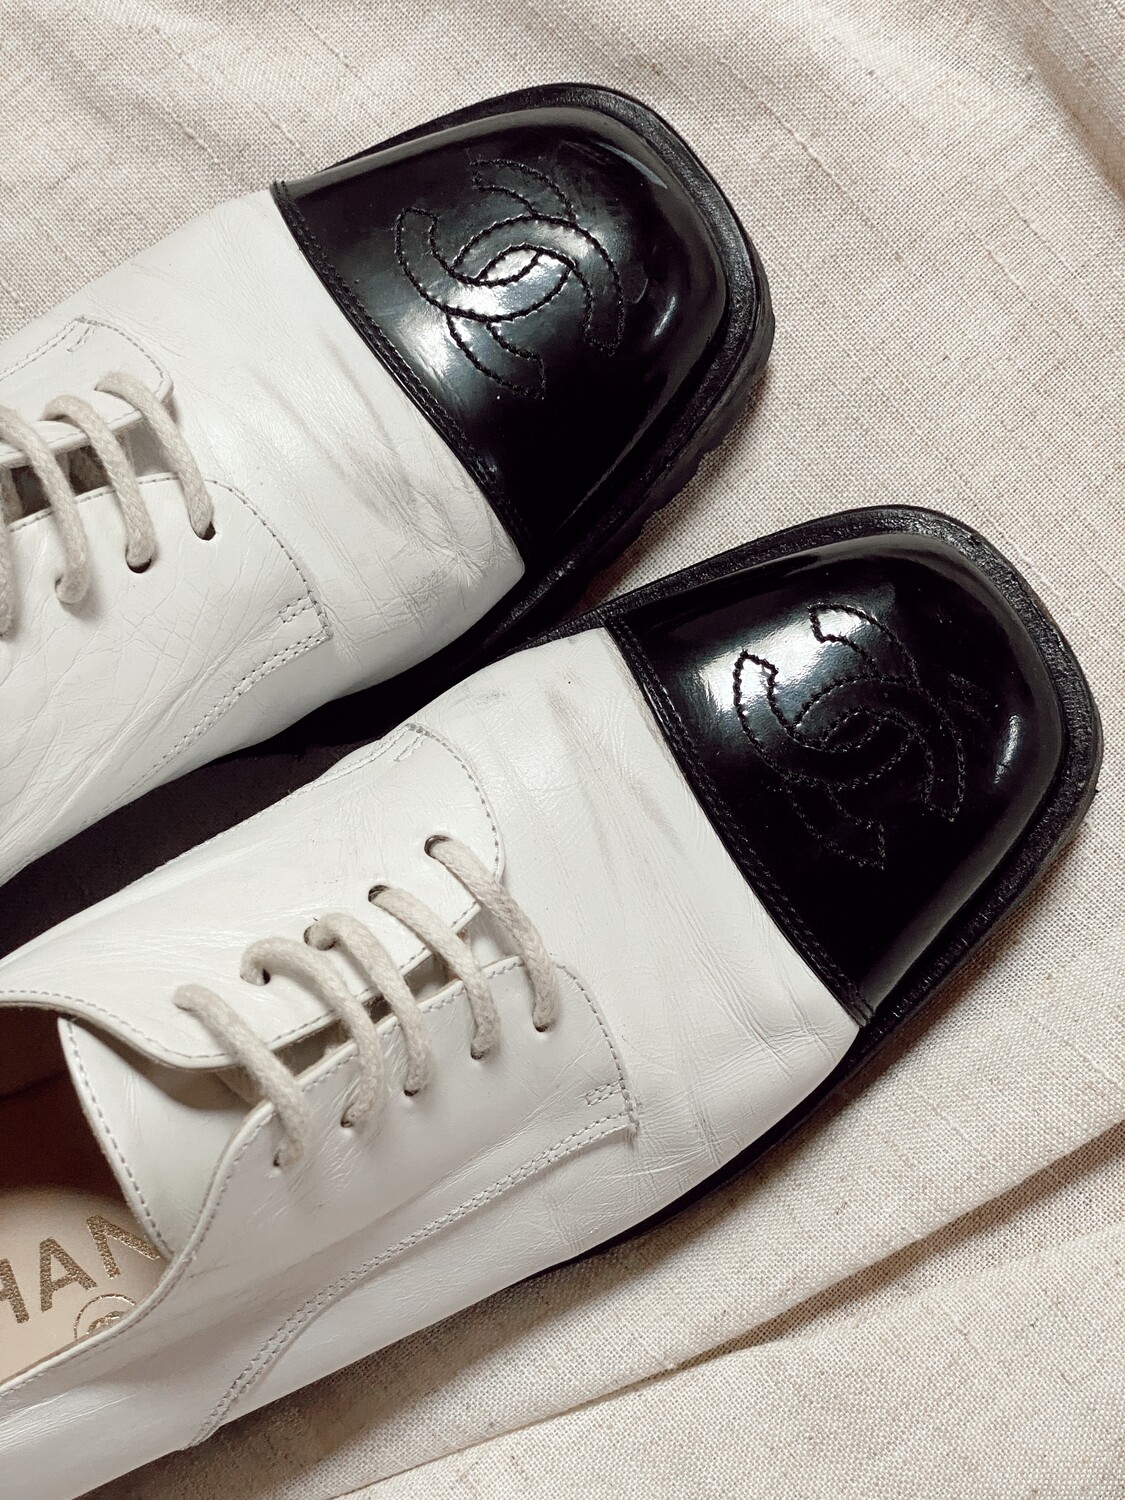 Chanel Sneakers White Leather w/ Black Leather CC To Cap 38 / 8